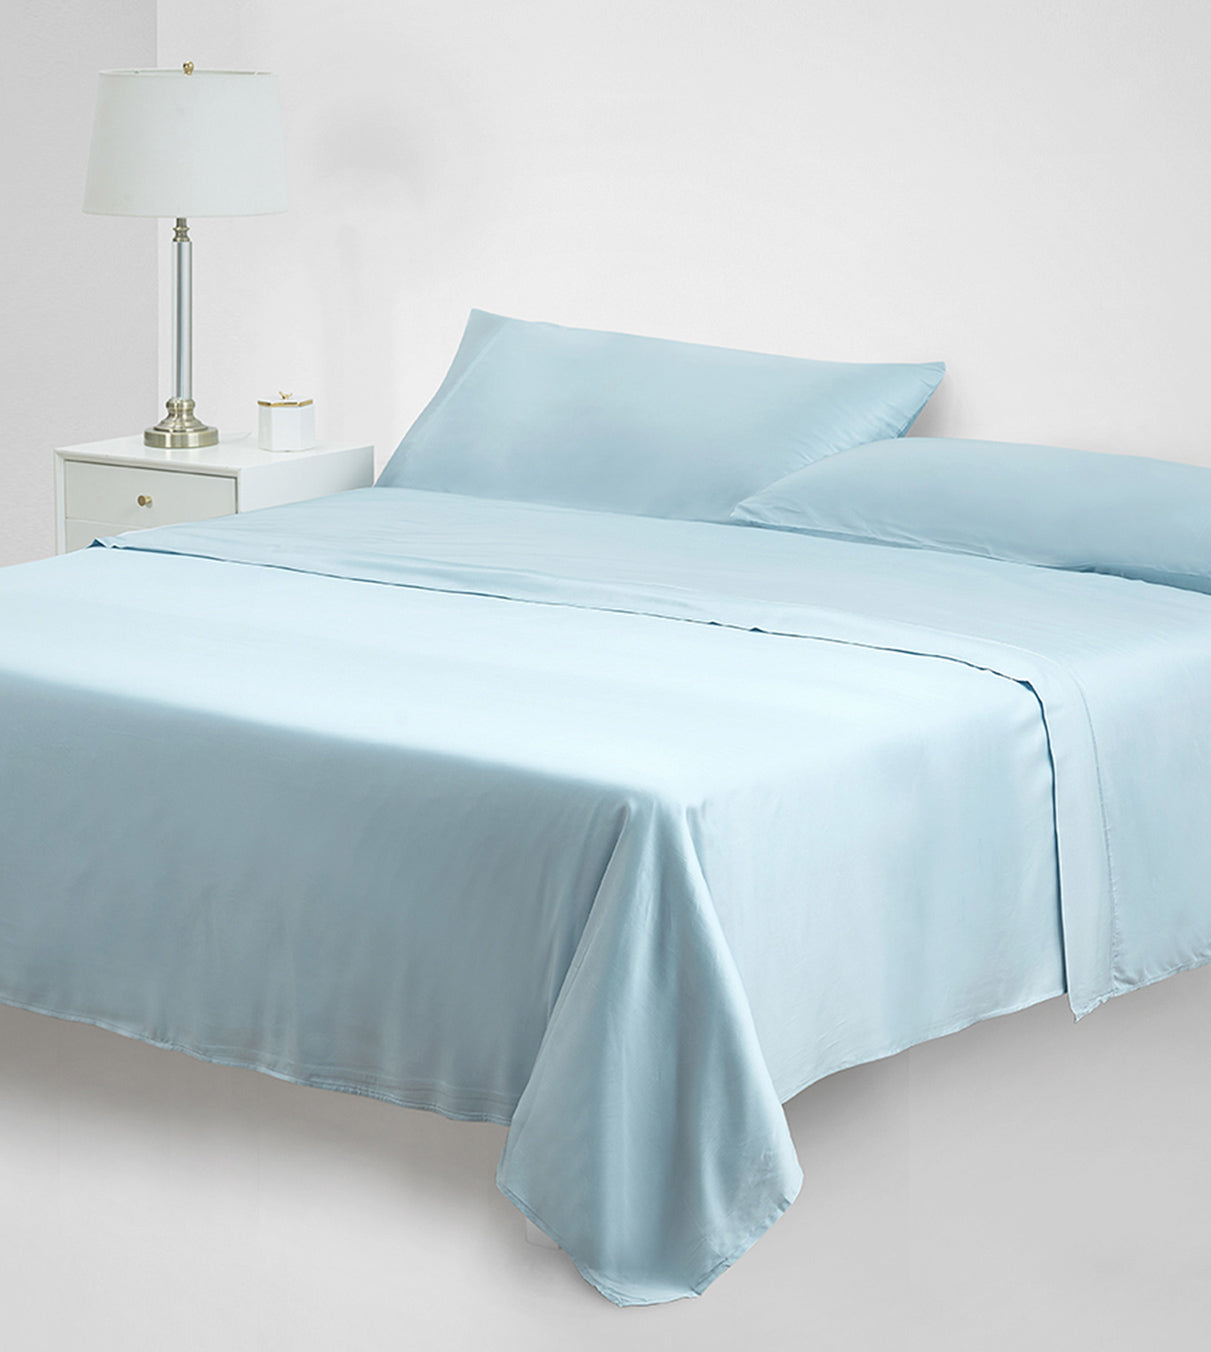 Product: Cooling Bamboo Twill Sheet Set | Color: Light Blue